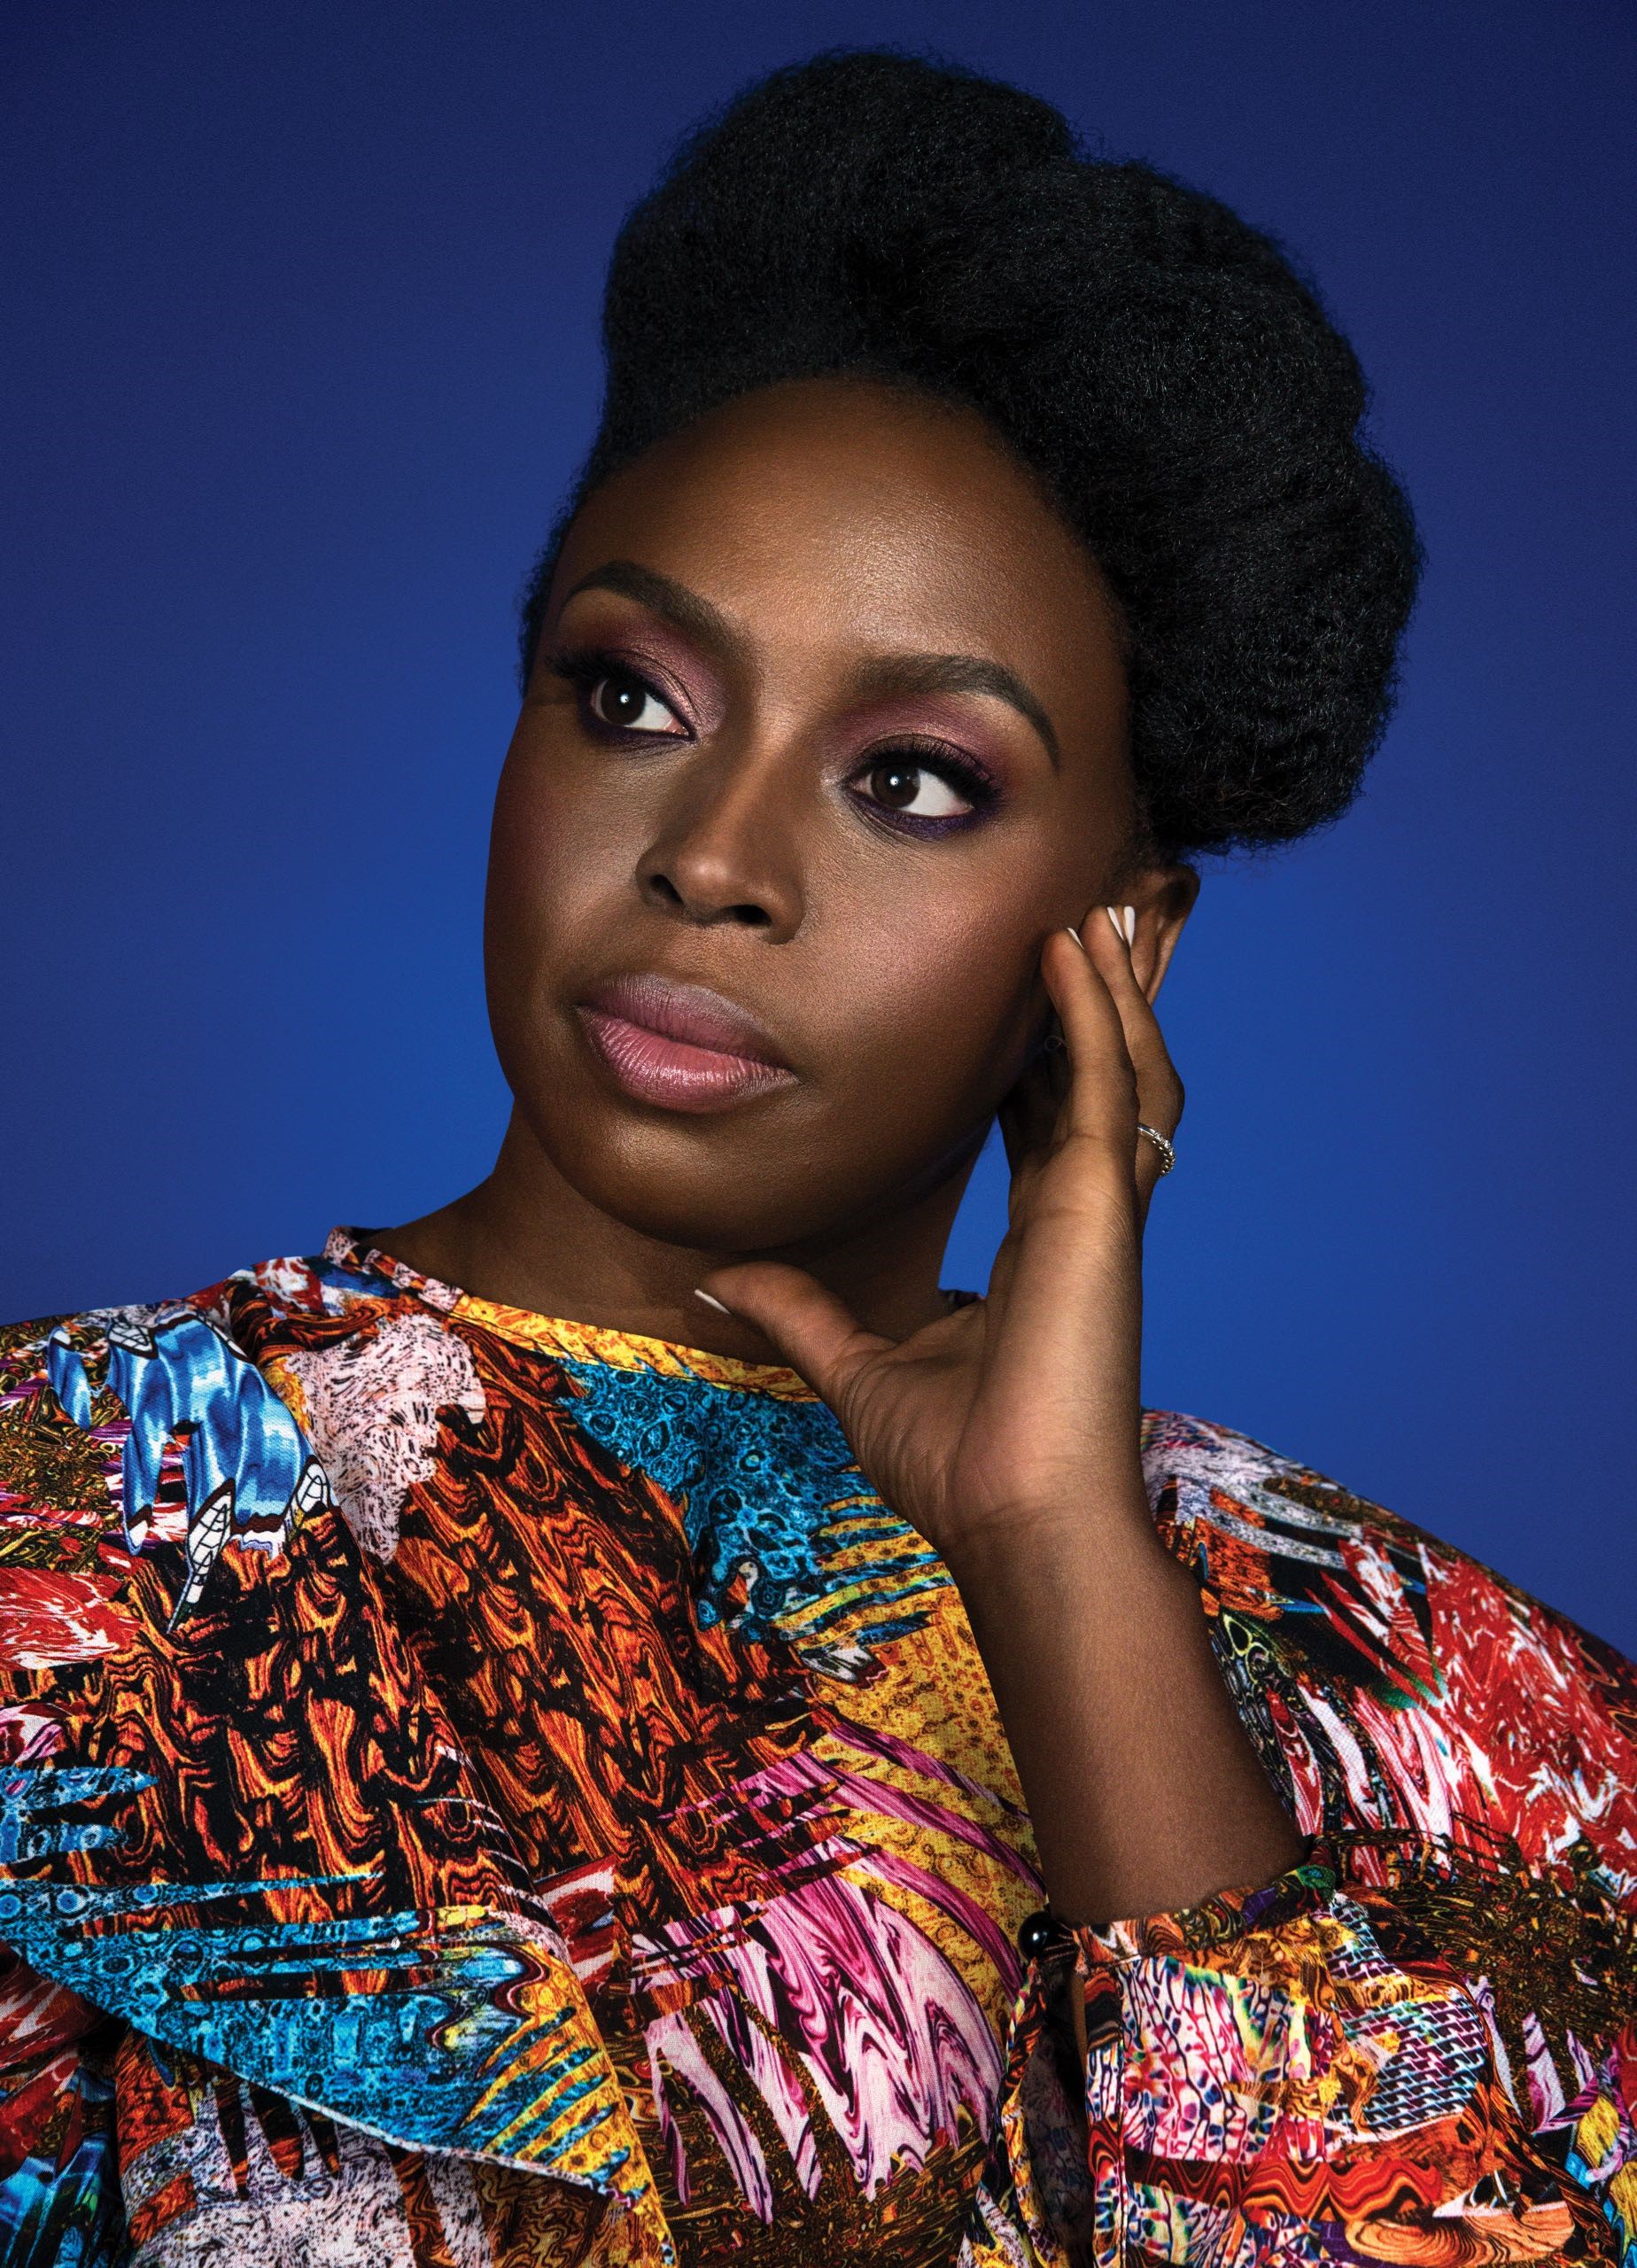 Opinion: I Have Never Been So Proud of My Fellow Nigerians, Adichie